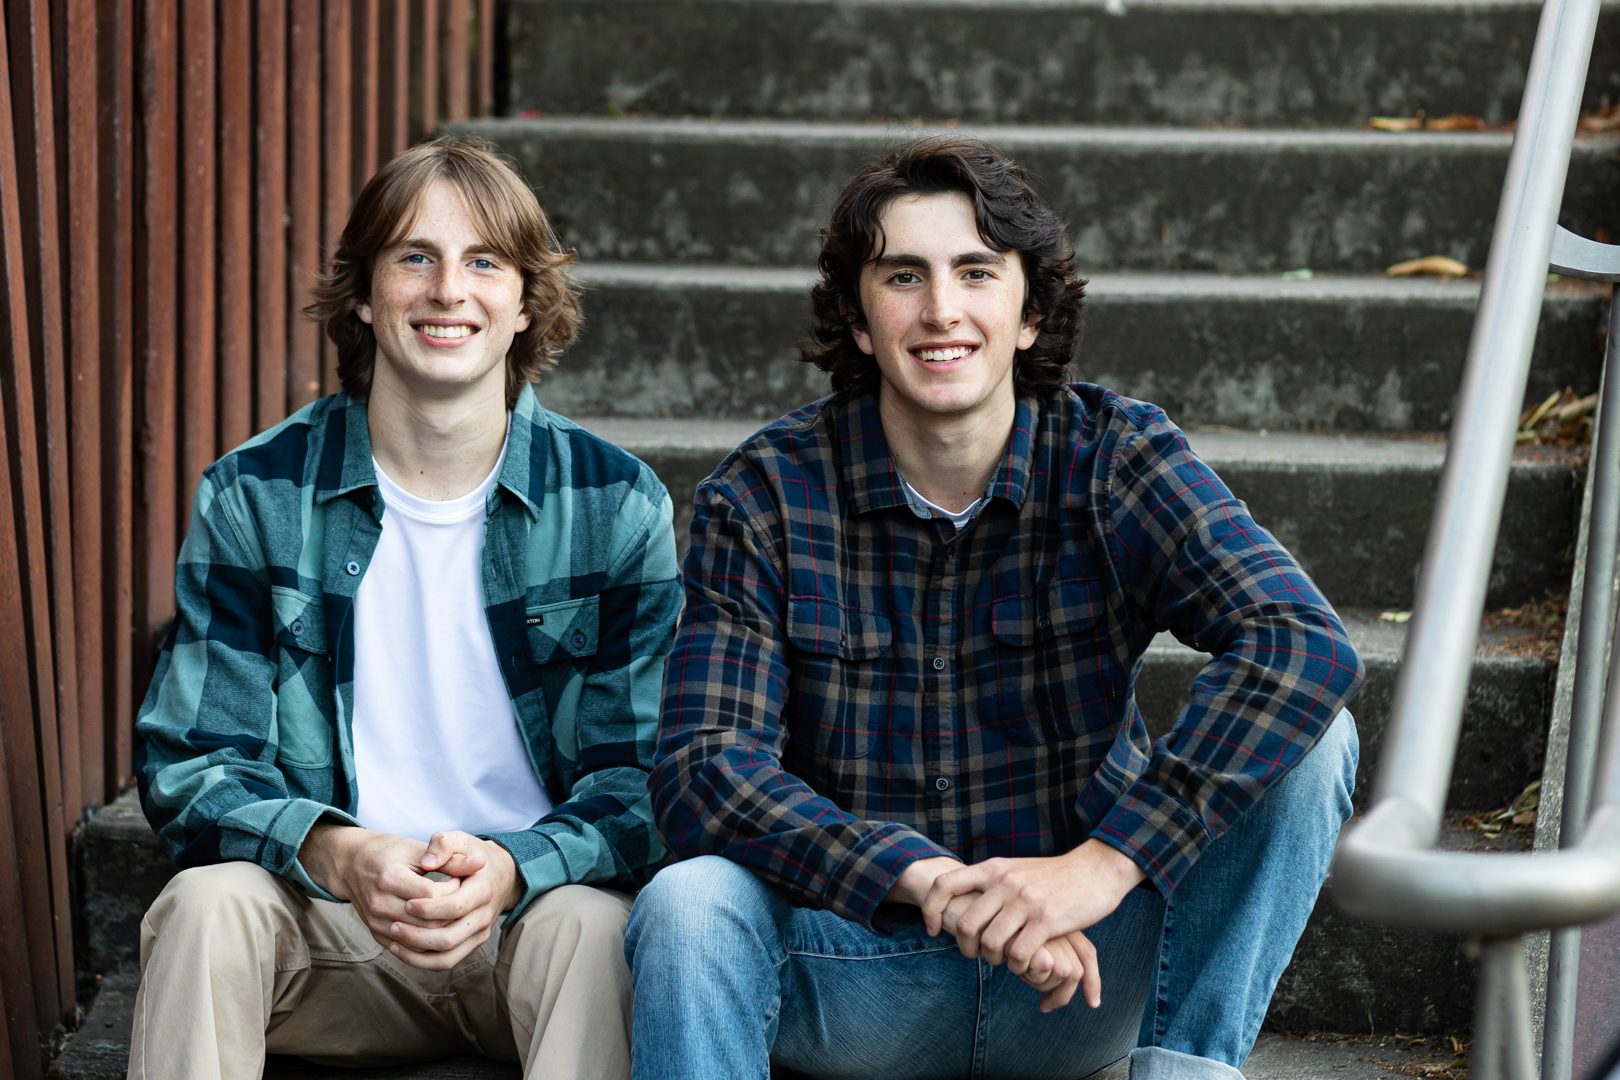 Two young men sitting on steps smiling for the camera.